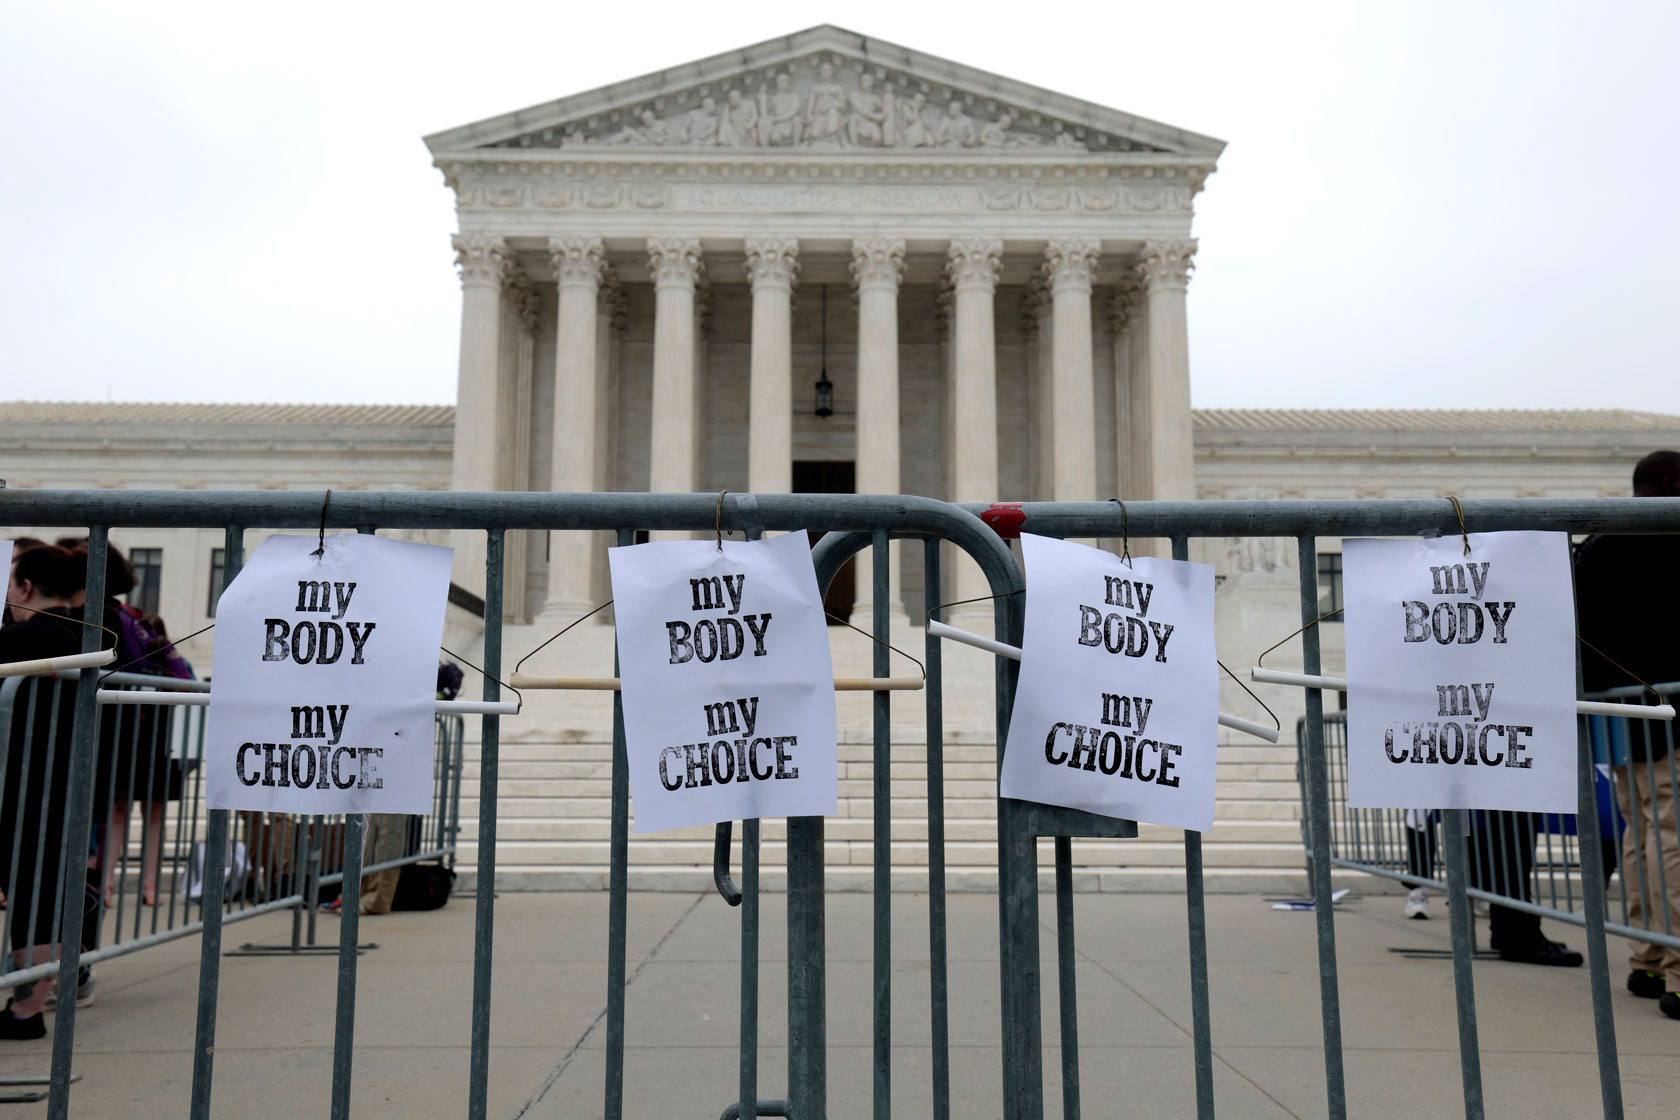 Photo shows four signs hanging on a fence in front of the Supreme Court building. The signs read 